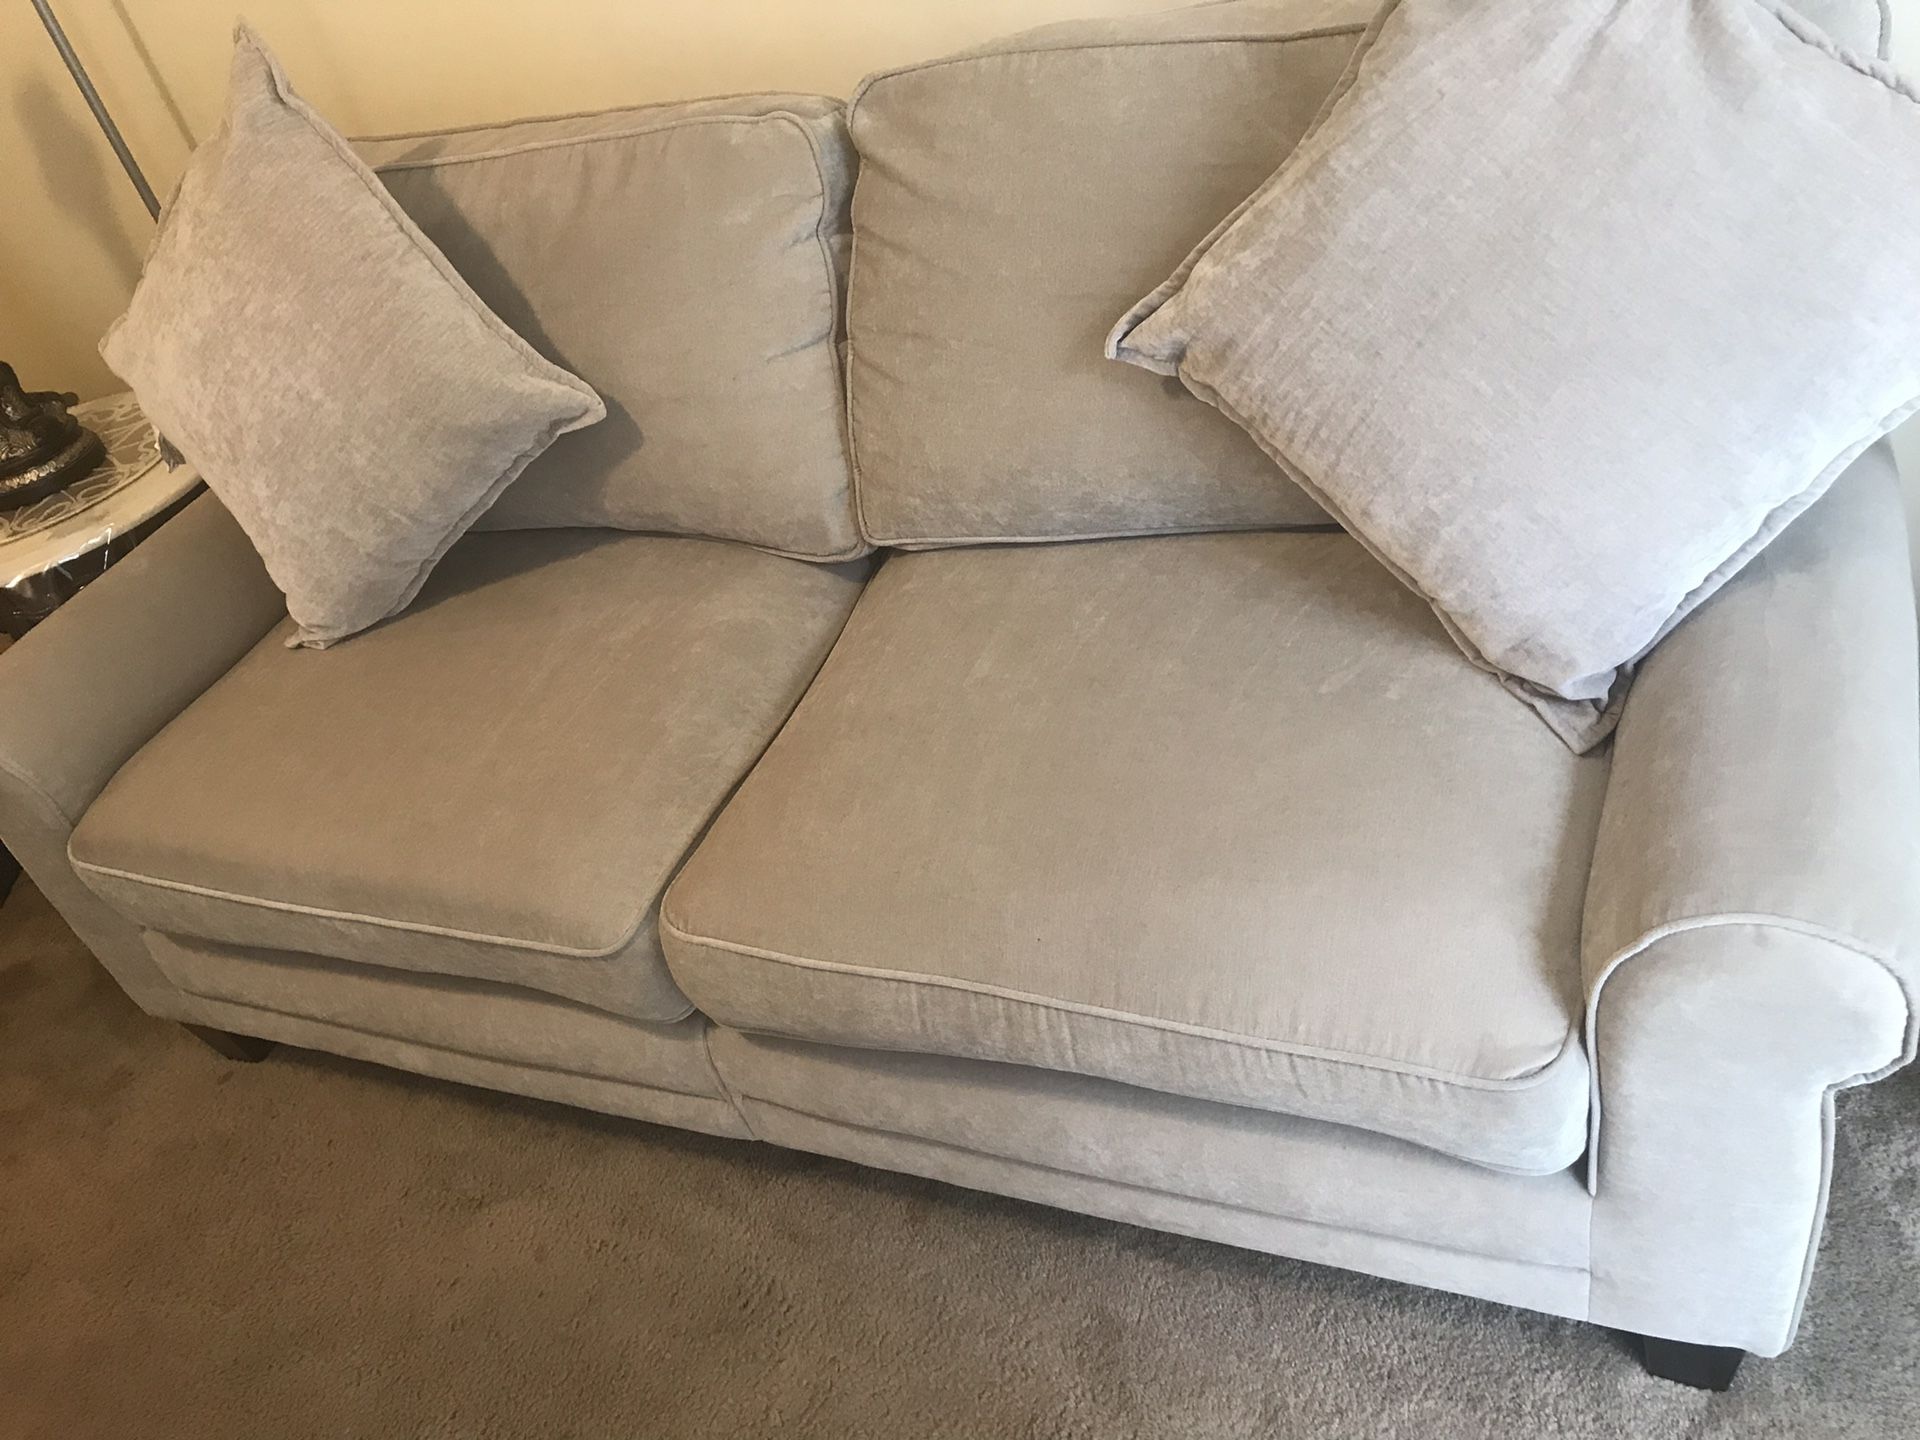 Ivory sofa with 2 pillows like new smoke pet kids free home always covered pick up in Gaithersburg md 20877